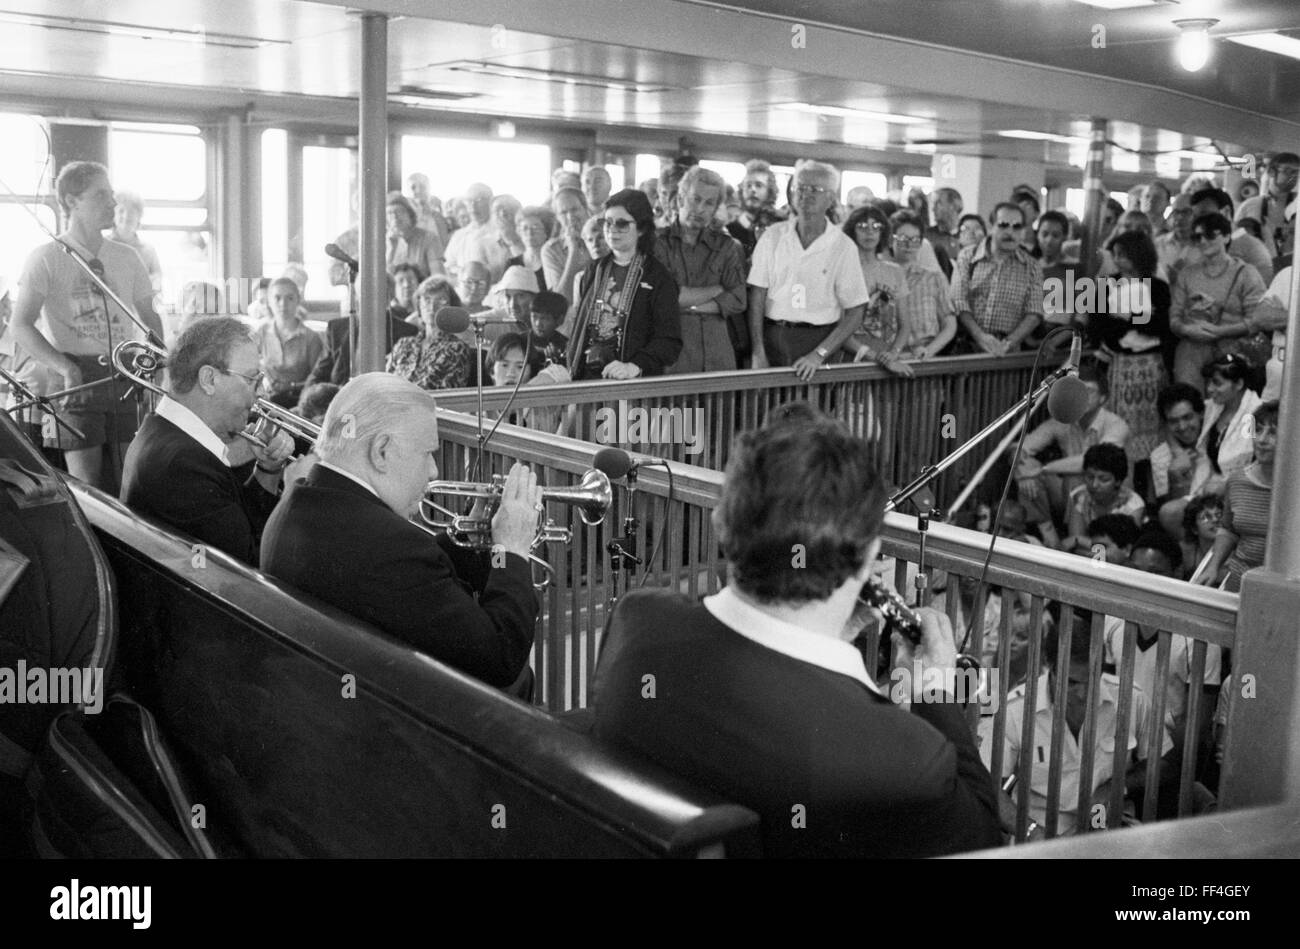 Wild Bill Davison, cornet player, at a concert given as part of the 1982 Kool Jazz Festival. This event was “Jazz on the Hudson” and took place on a boat circling Manhattan. Davison is seated at center, with white hair. Stock Photo